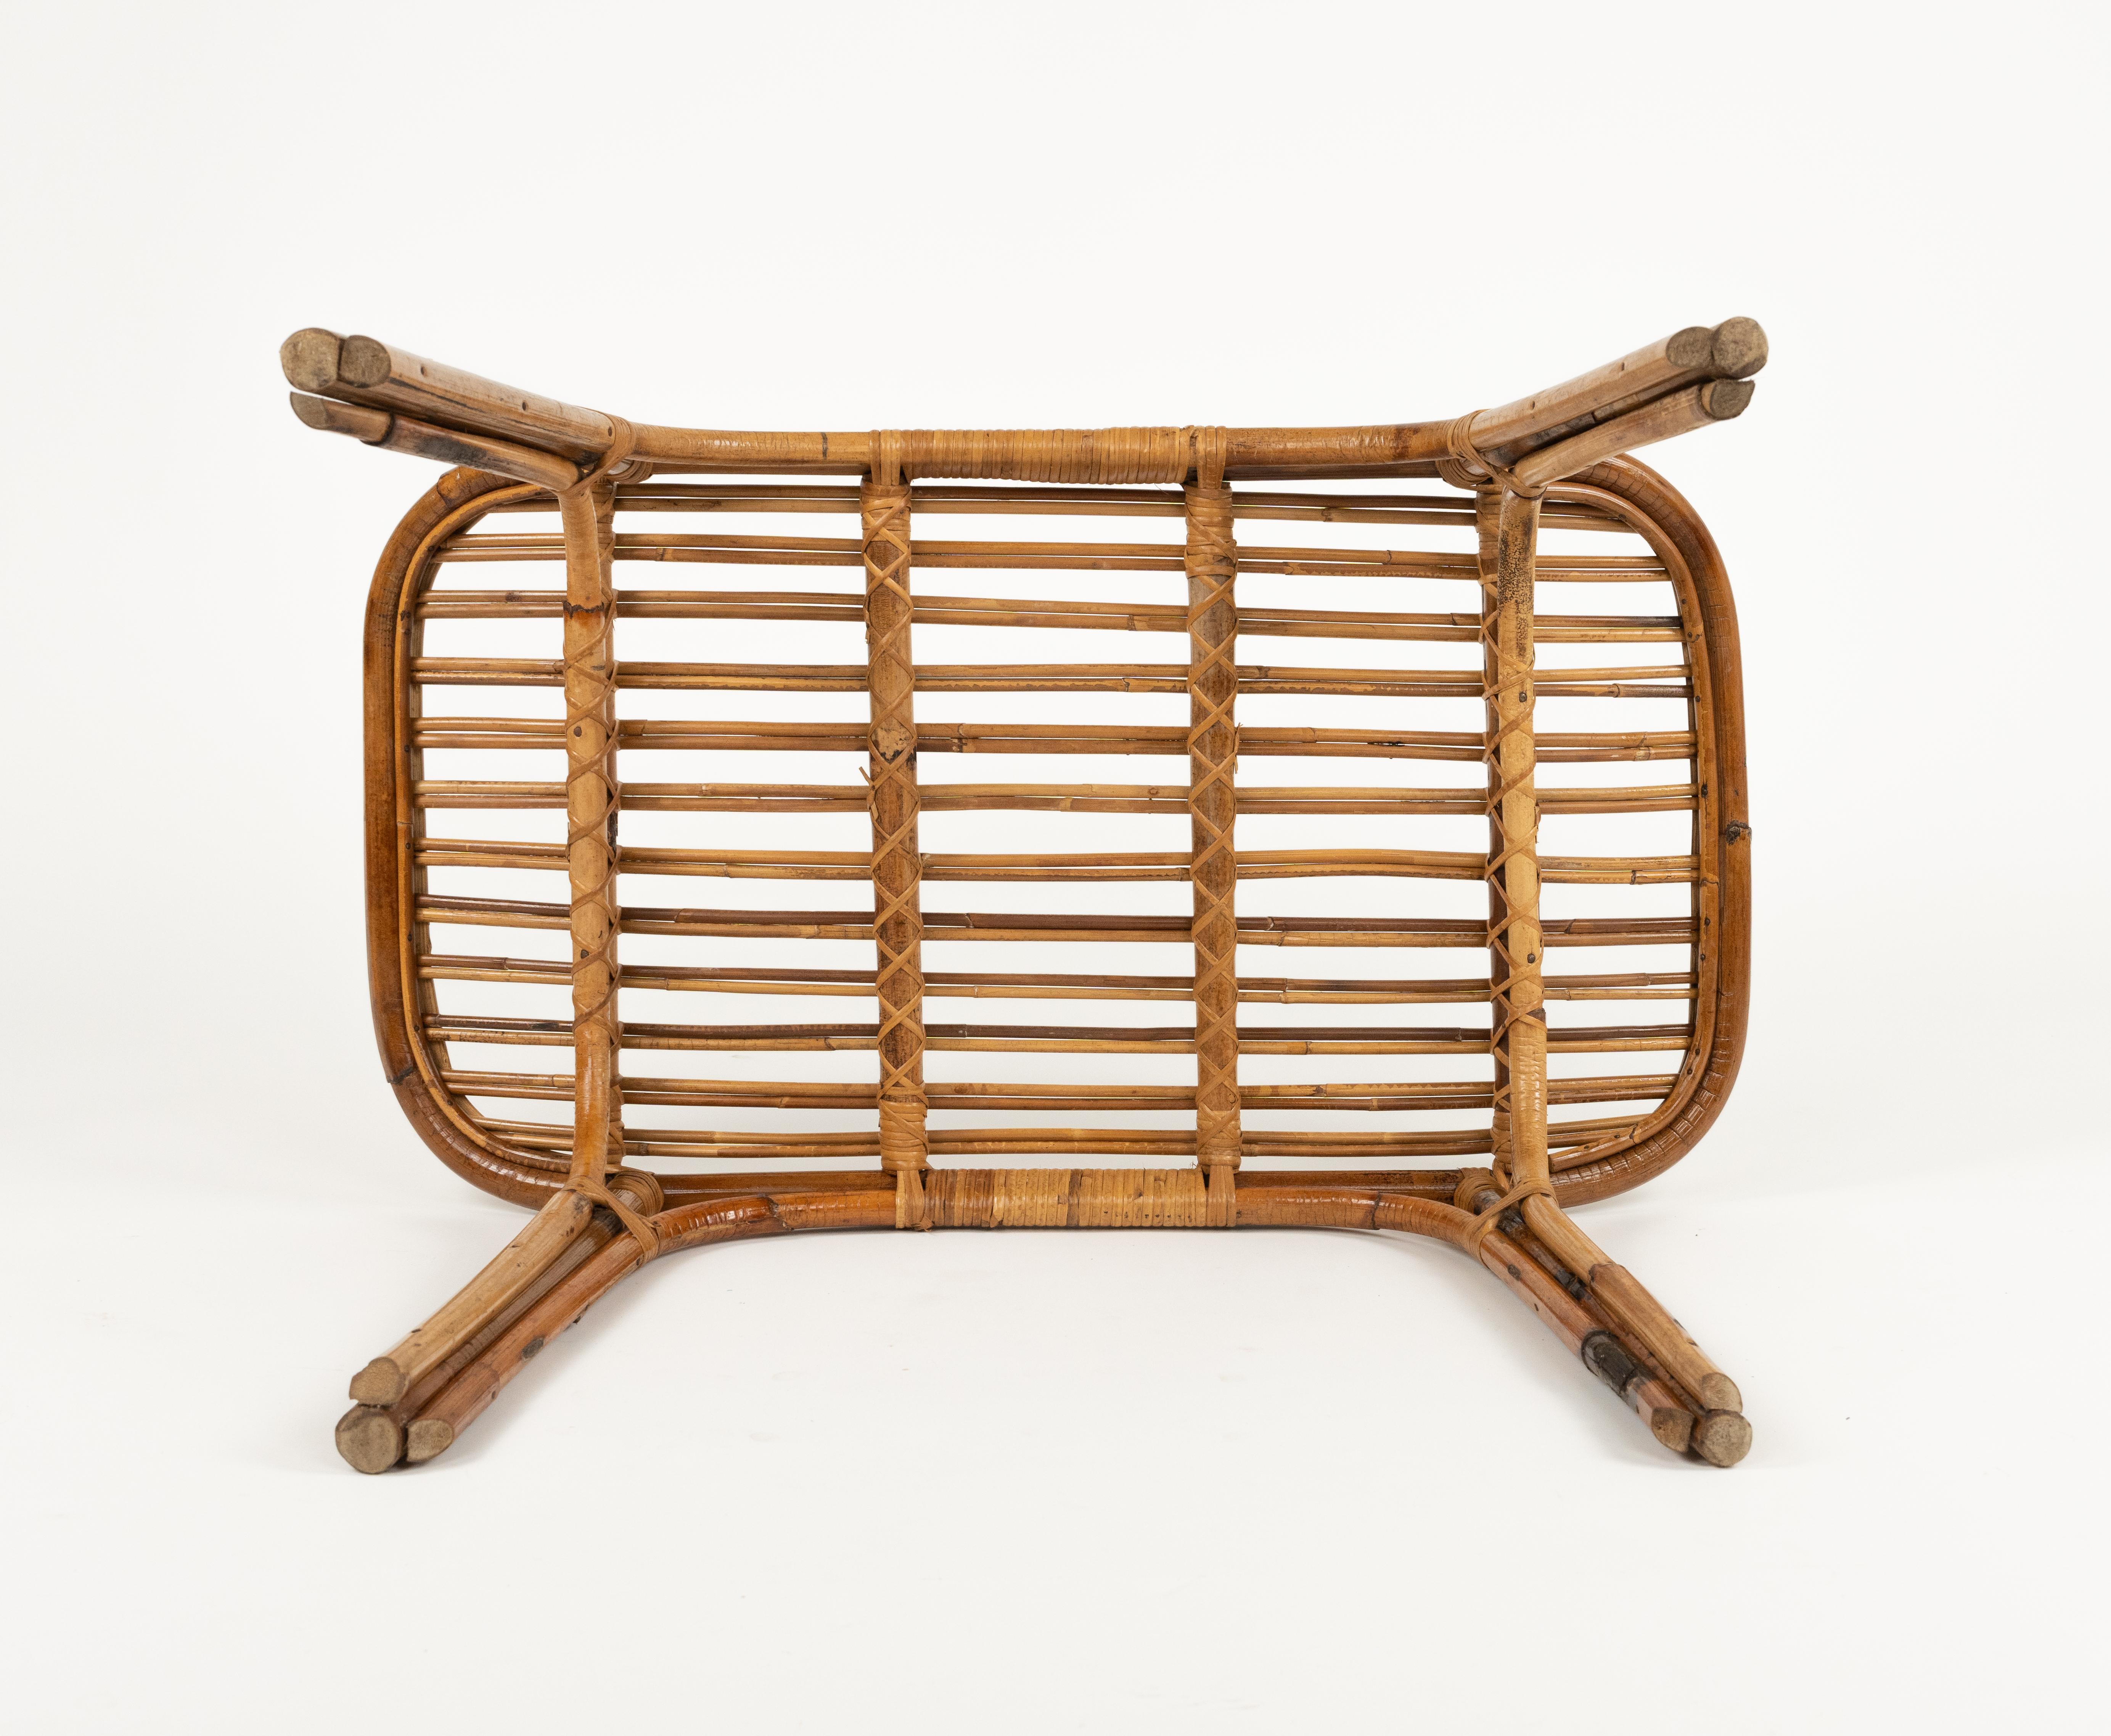 Midcentury Bench or Side Table in Rattan & Bamboo Tito Agnoli Style, Italy 1960s For Sale 11